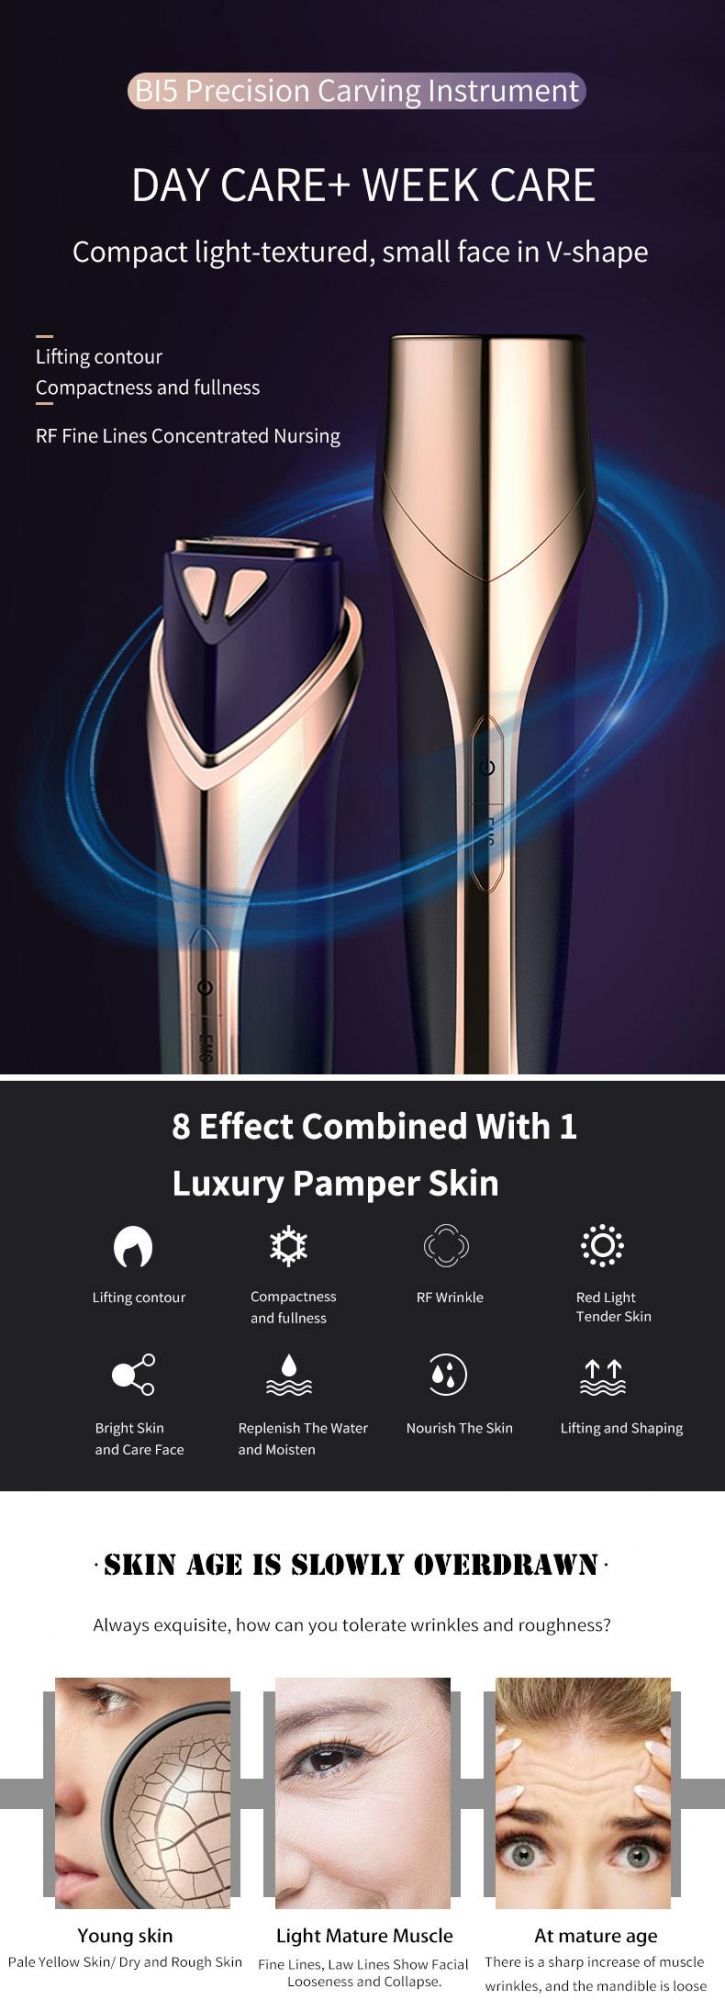 Facial Cleaner Carving Instrument Bright Skin and Care Face Lifting Contour Durable Anti-Aging Beauty Care Instrument